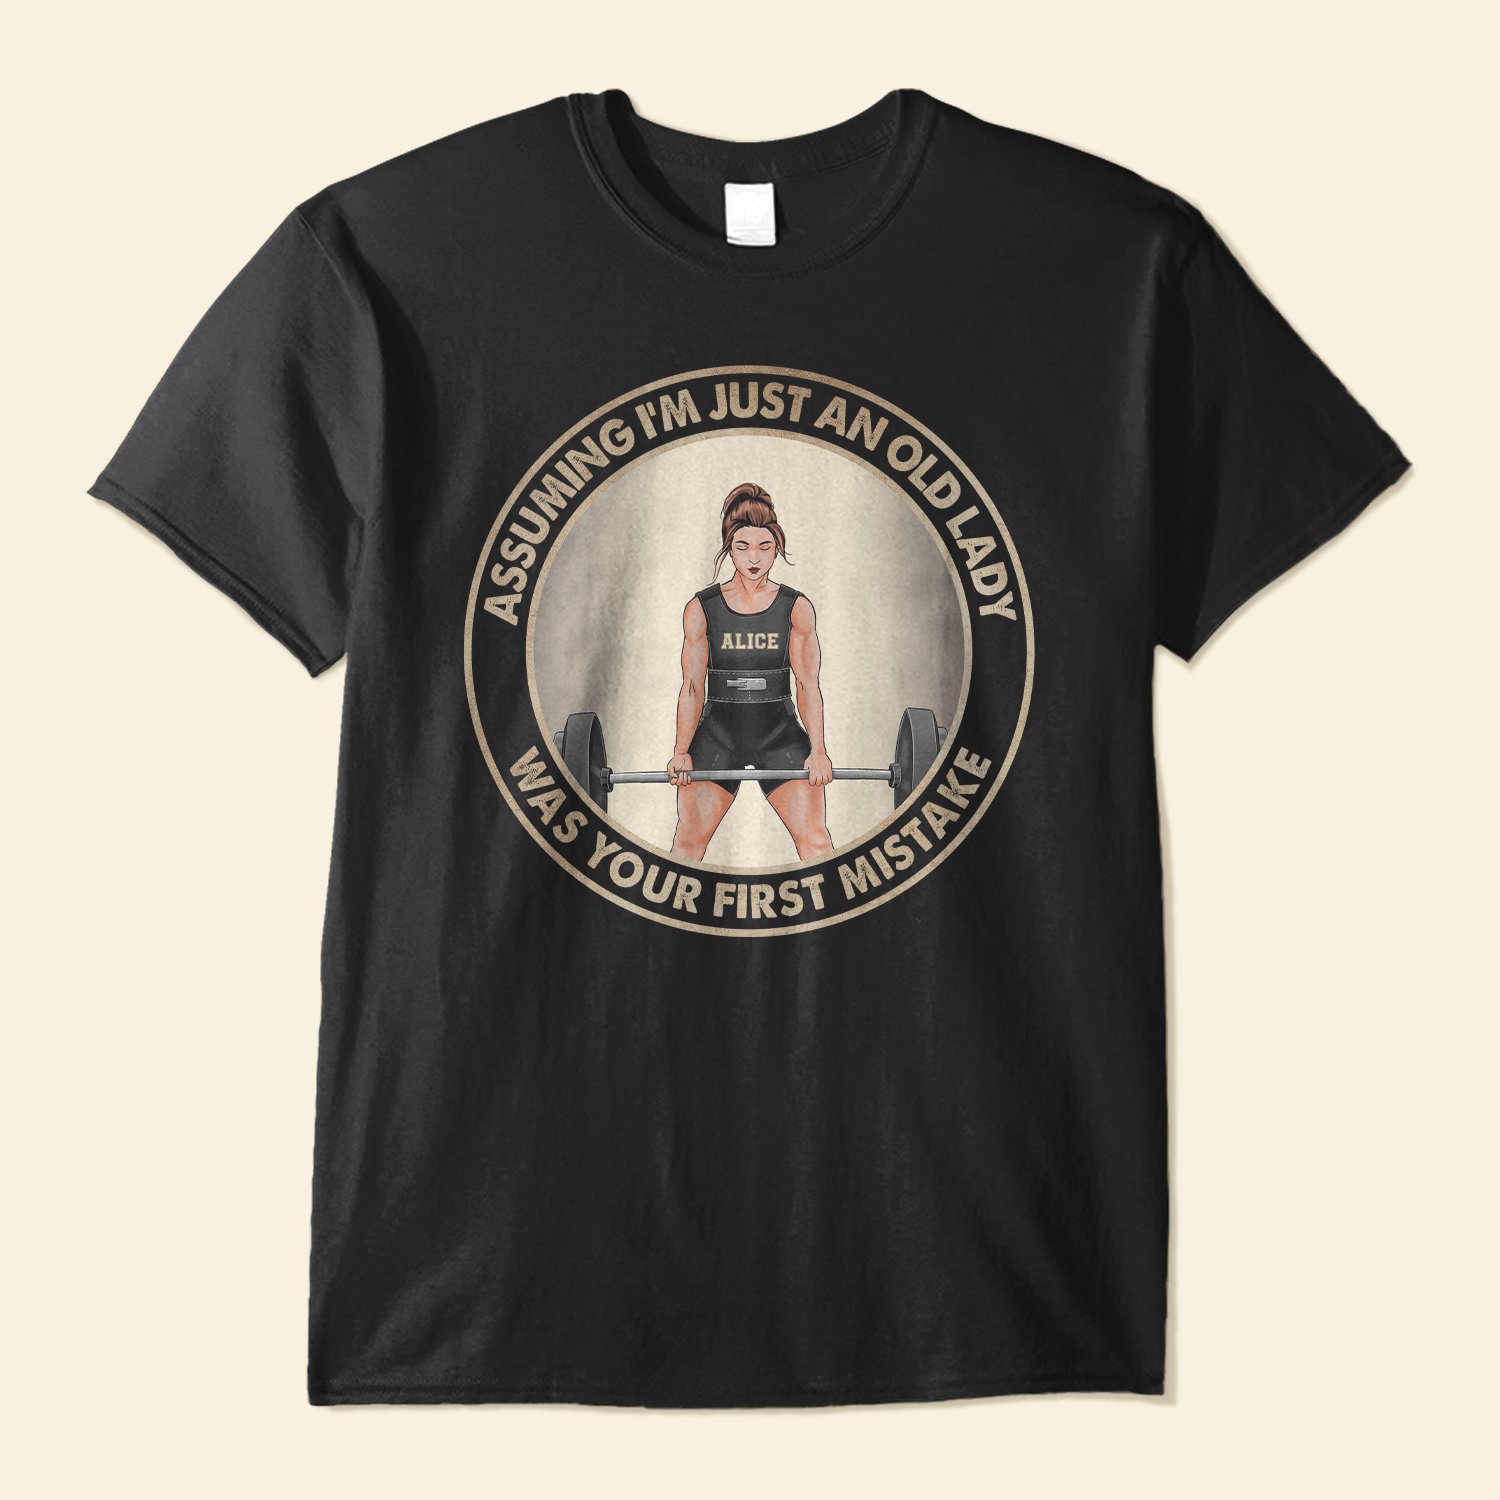 Assuming I'm Just An Old Lady - Personalized Shirt - Birthday Gift For Gymer